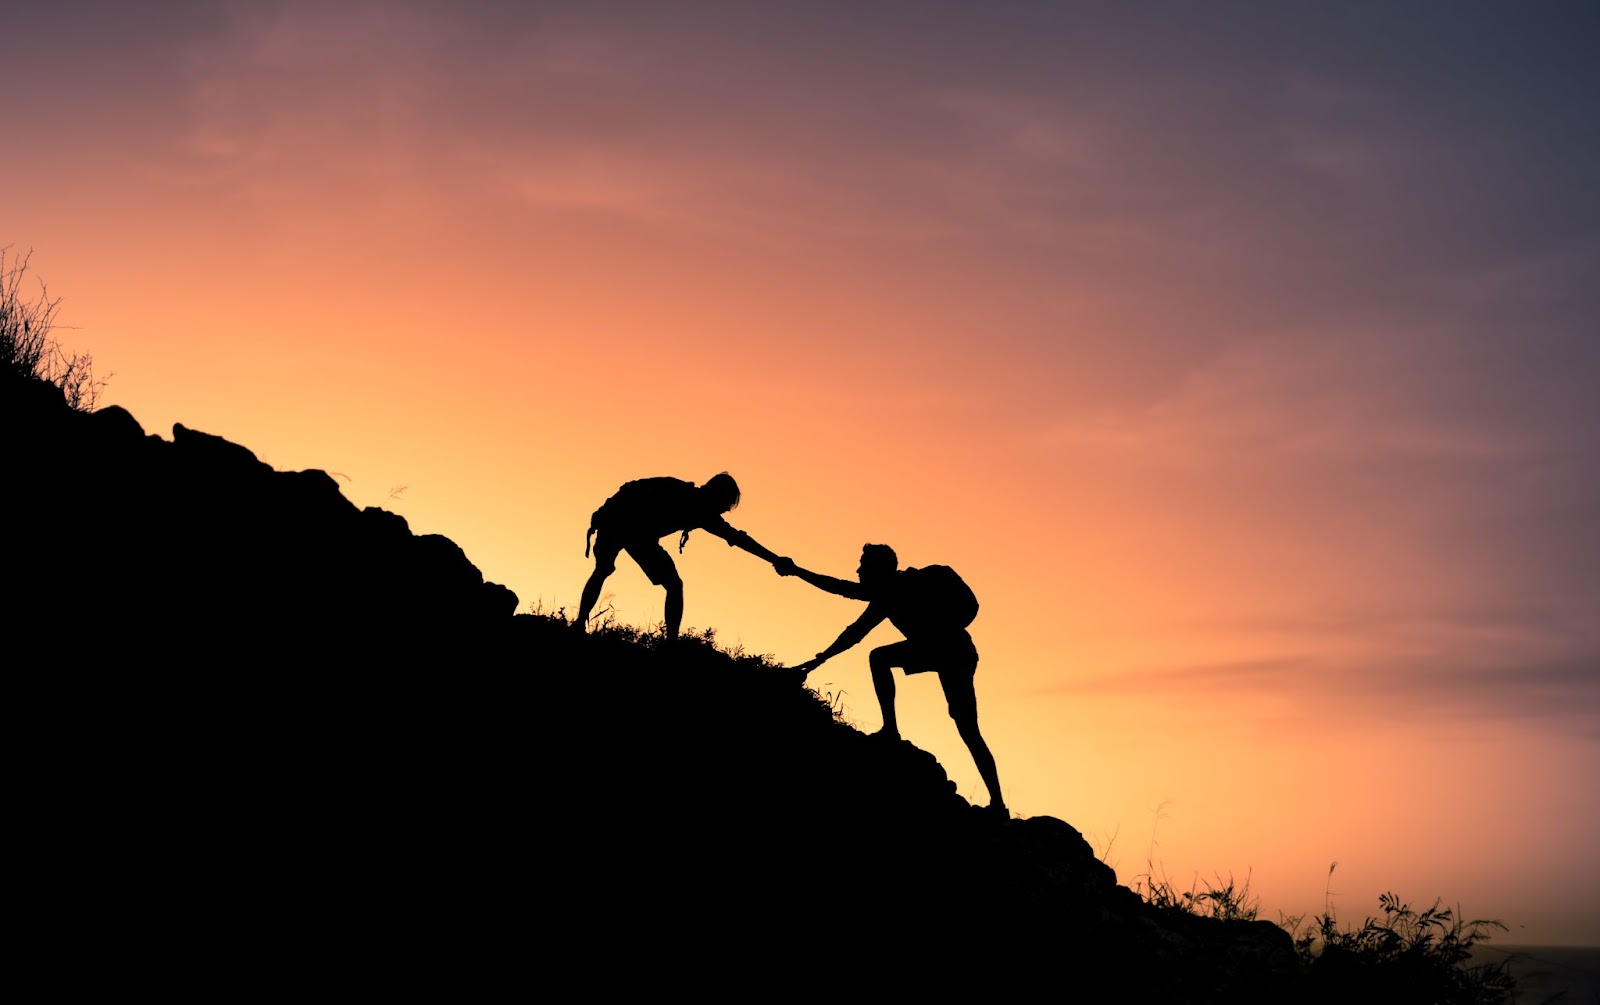 A person helping another person up a hill in the sunset